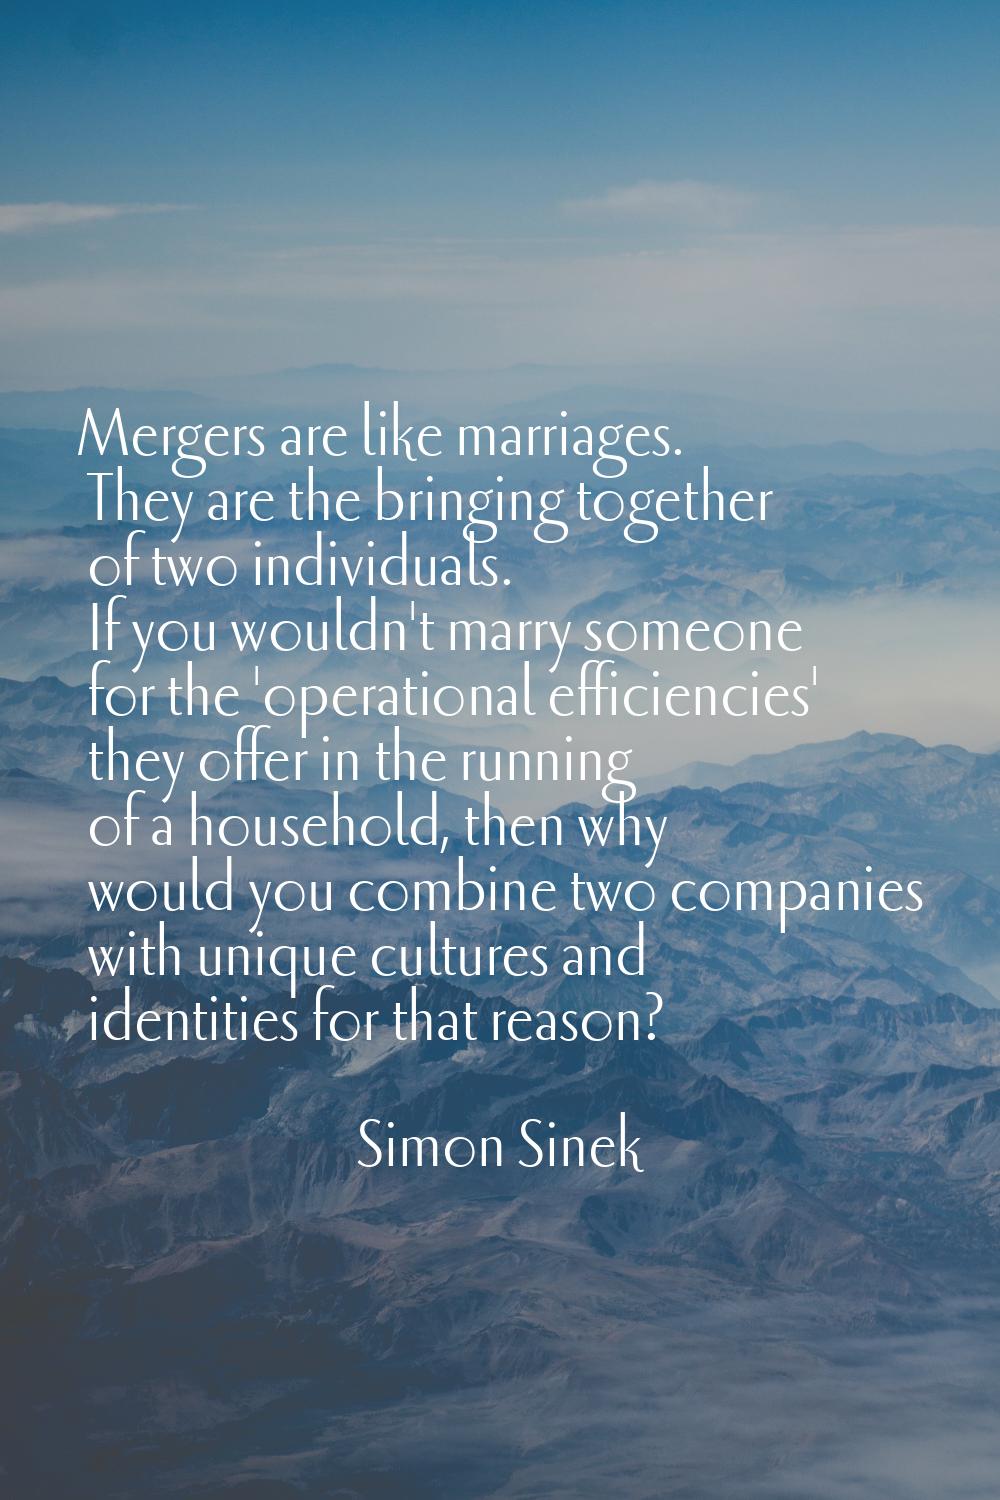 Mergers are like marriages. They are the bringing together of two individuals. If you wouldn't marr